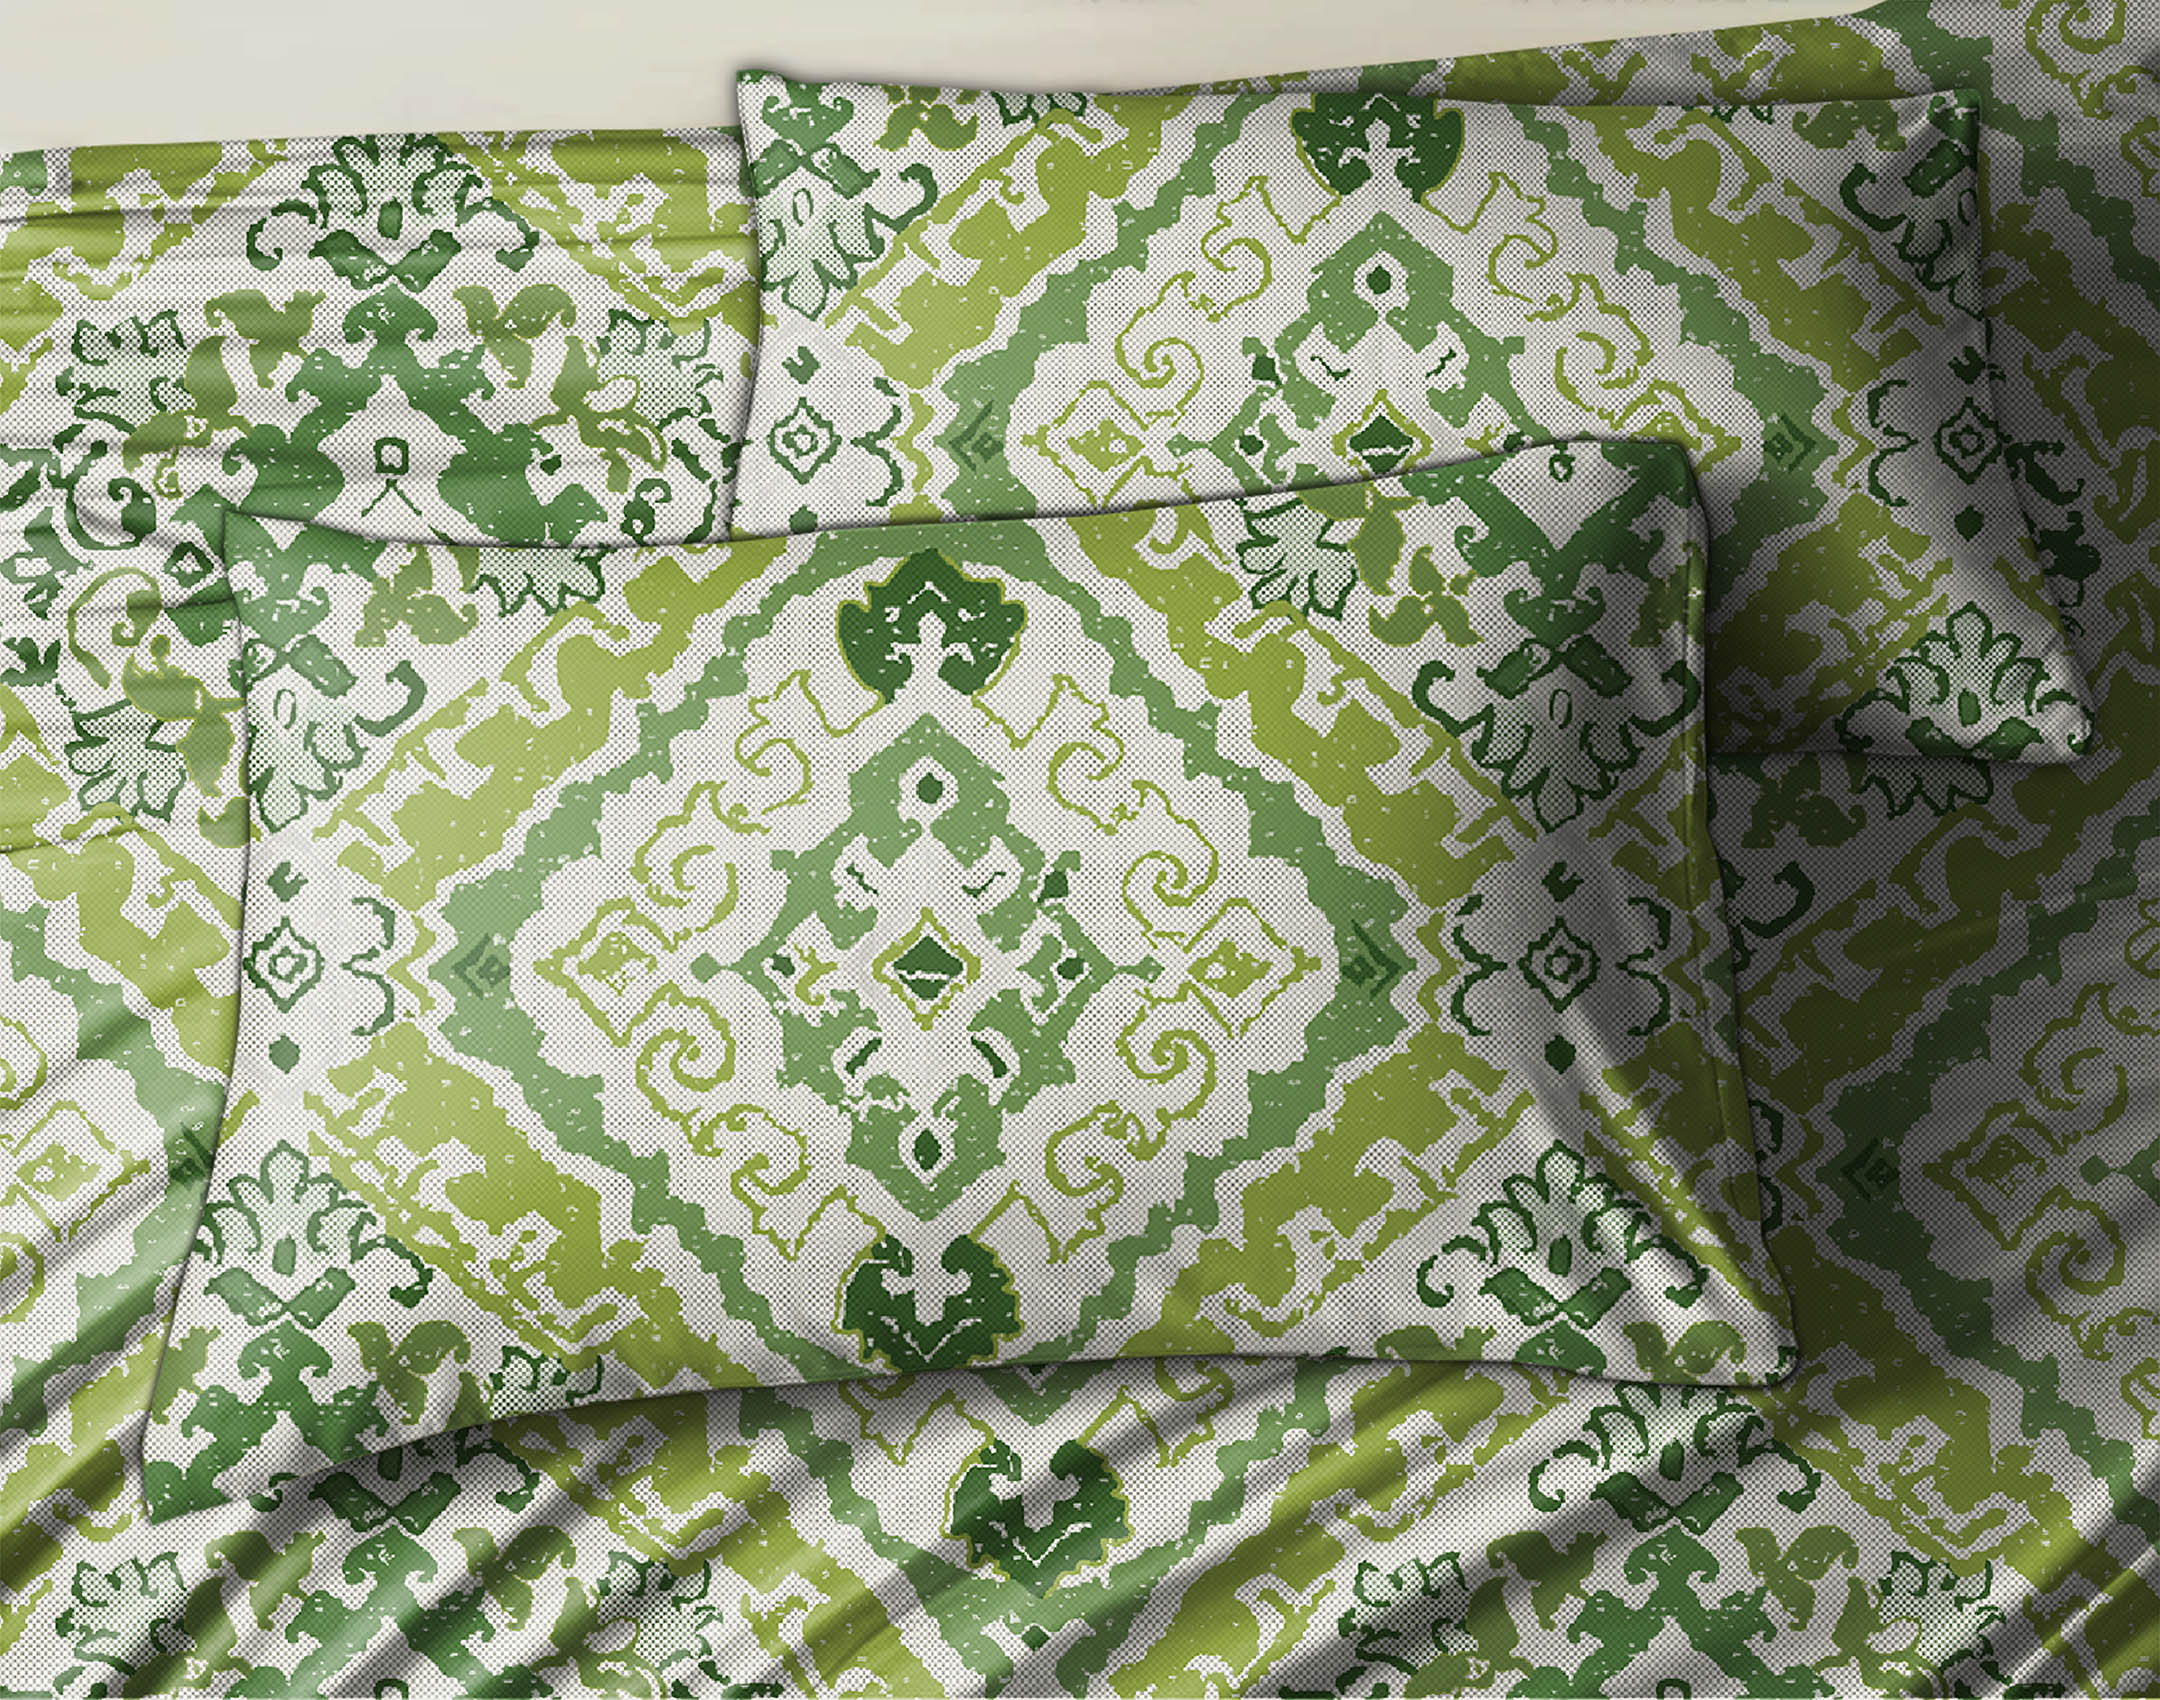 MOROCCO SPRING GREEN BEDSHEET FOR DOUBLE BED WITH 2 PILLOWCOVERS SIZE (104" X 90")